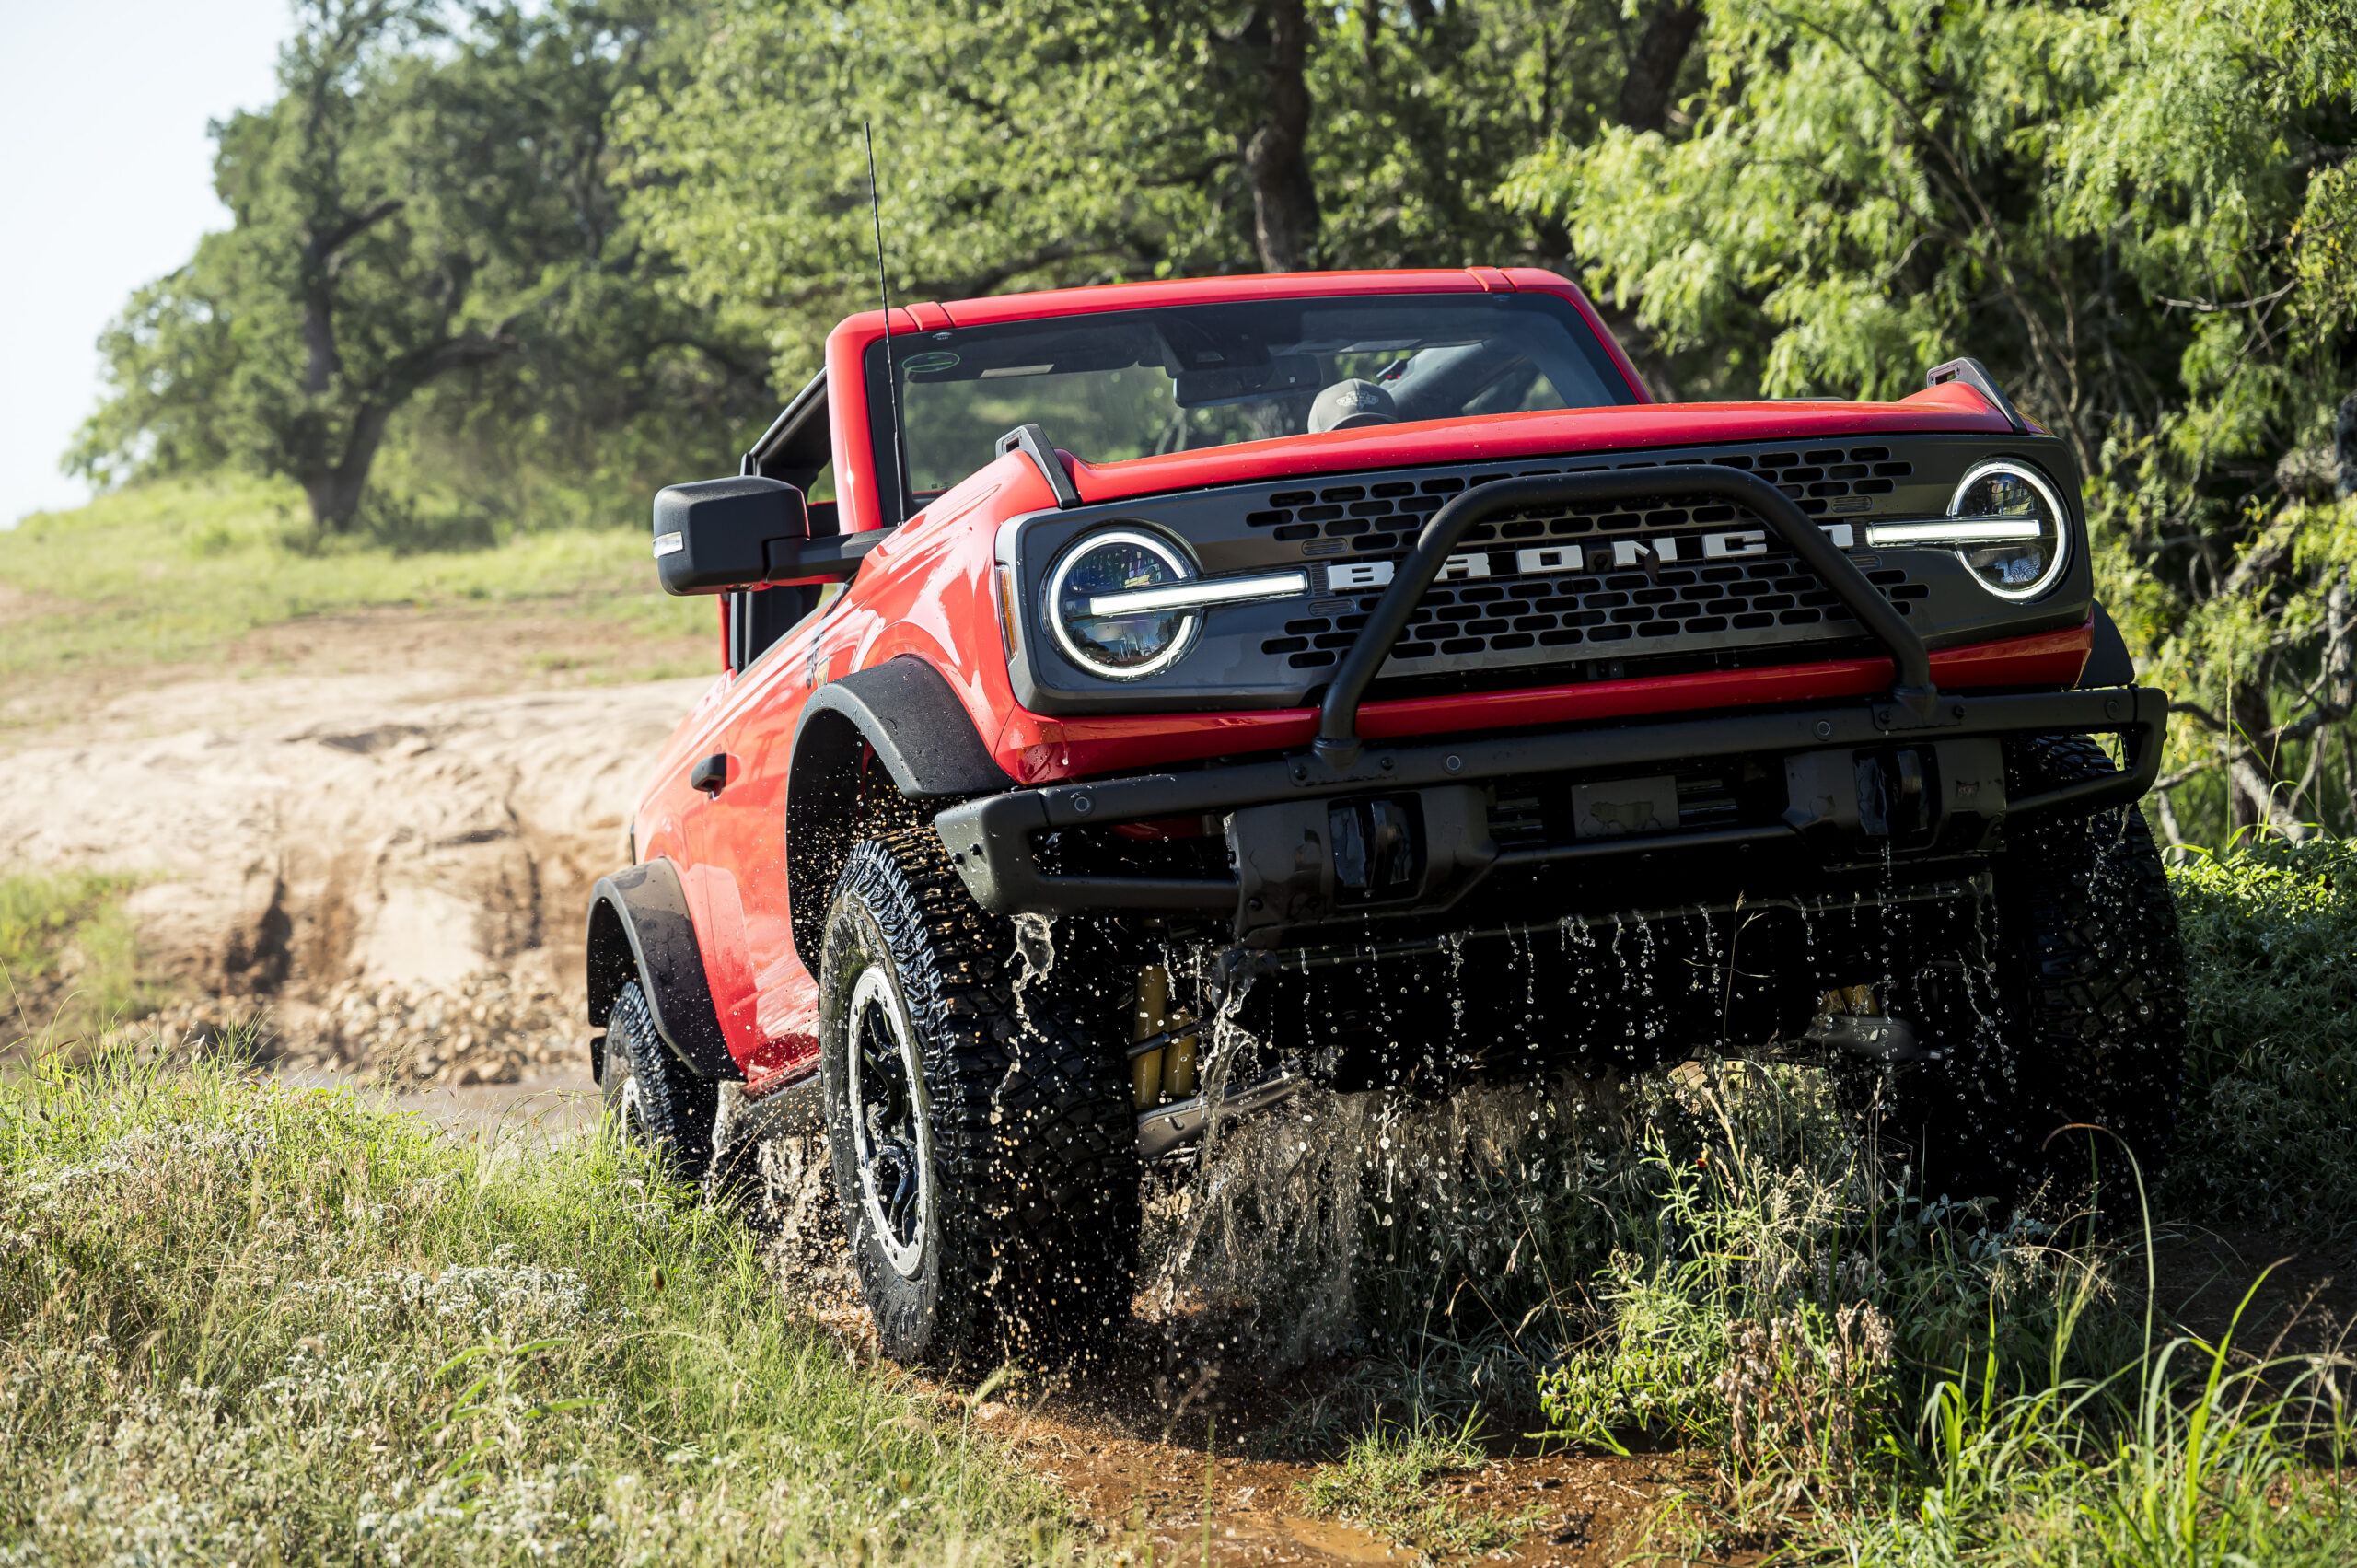 Ford made the Bronco capable for on and off-road pursuits.